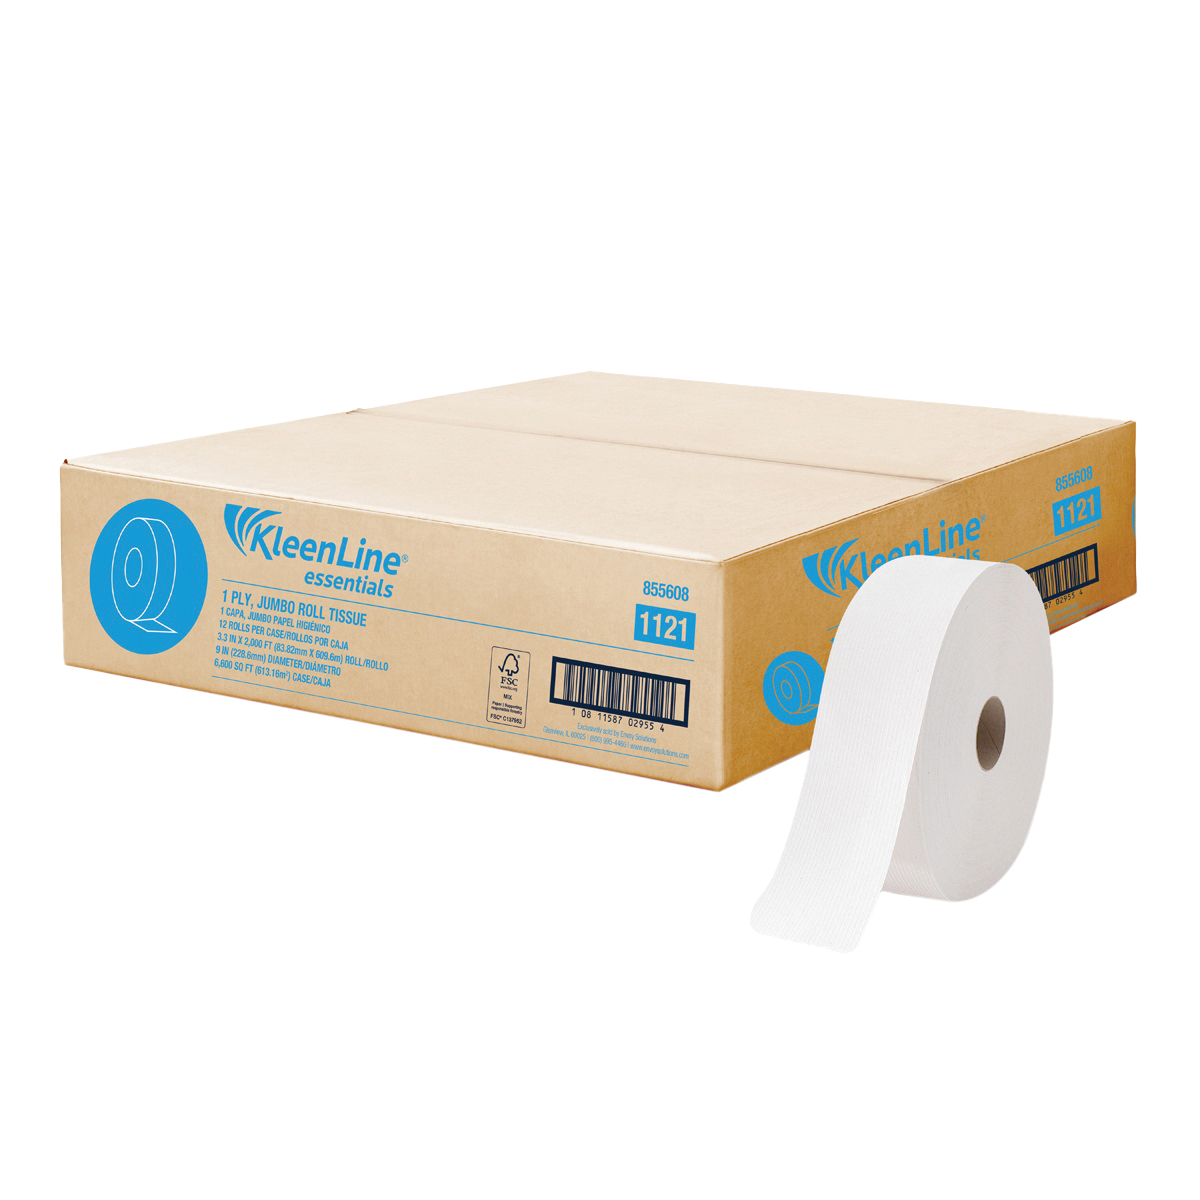 Classic Series 422806 Bathroom Tissue, 2000 ft L Roll, 1-Ply, Paper